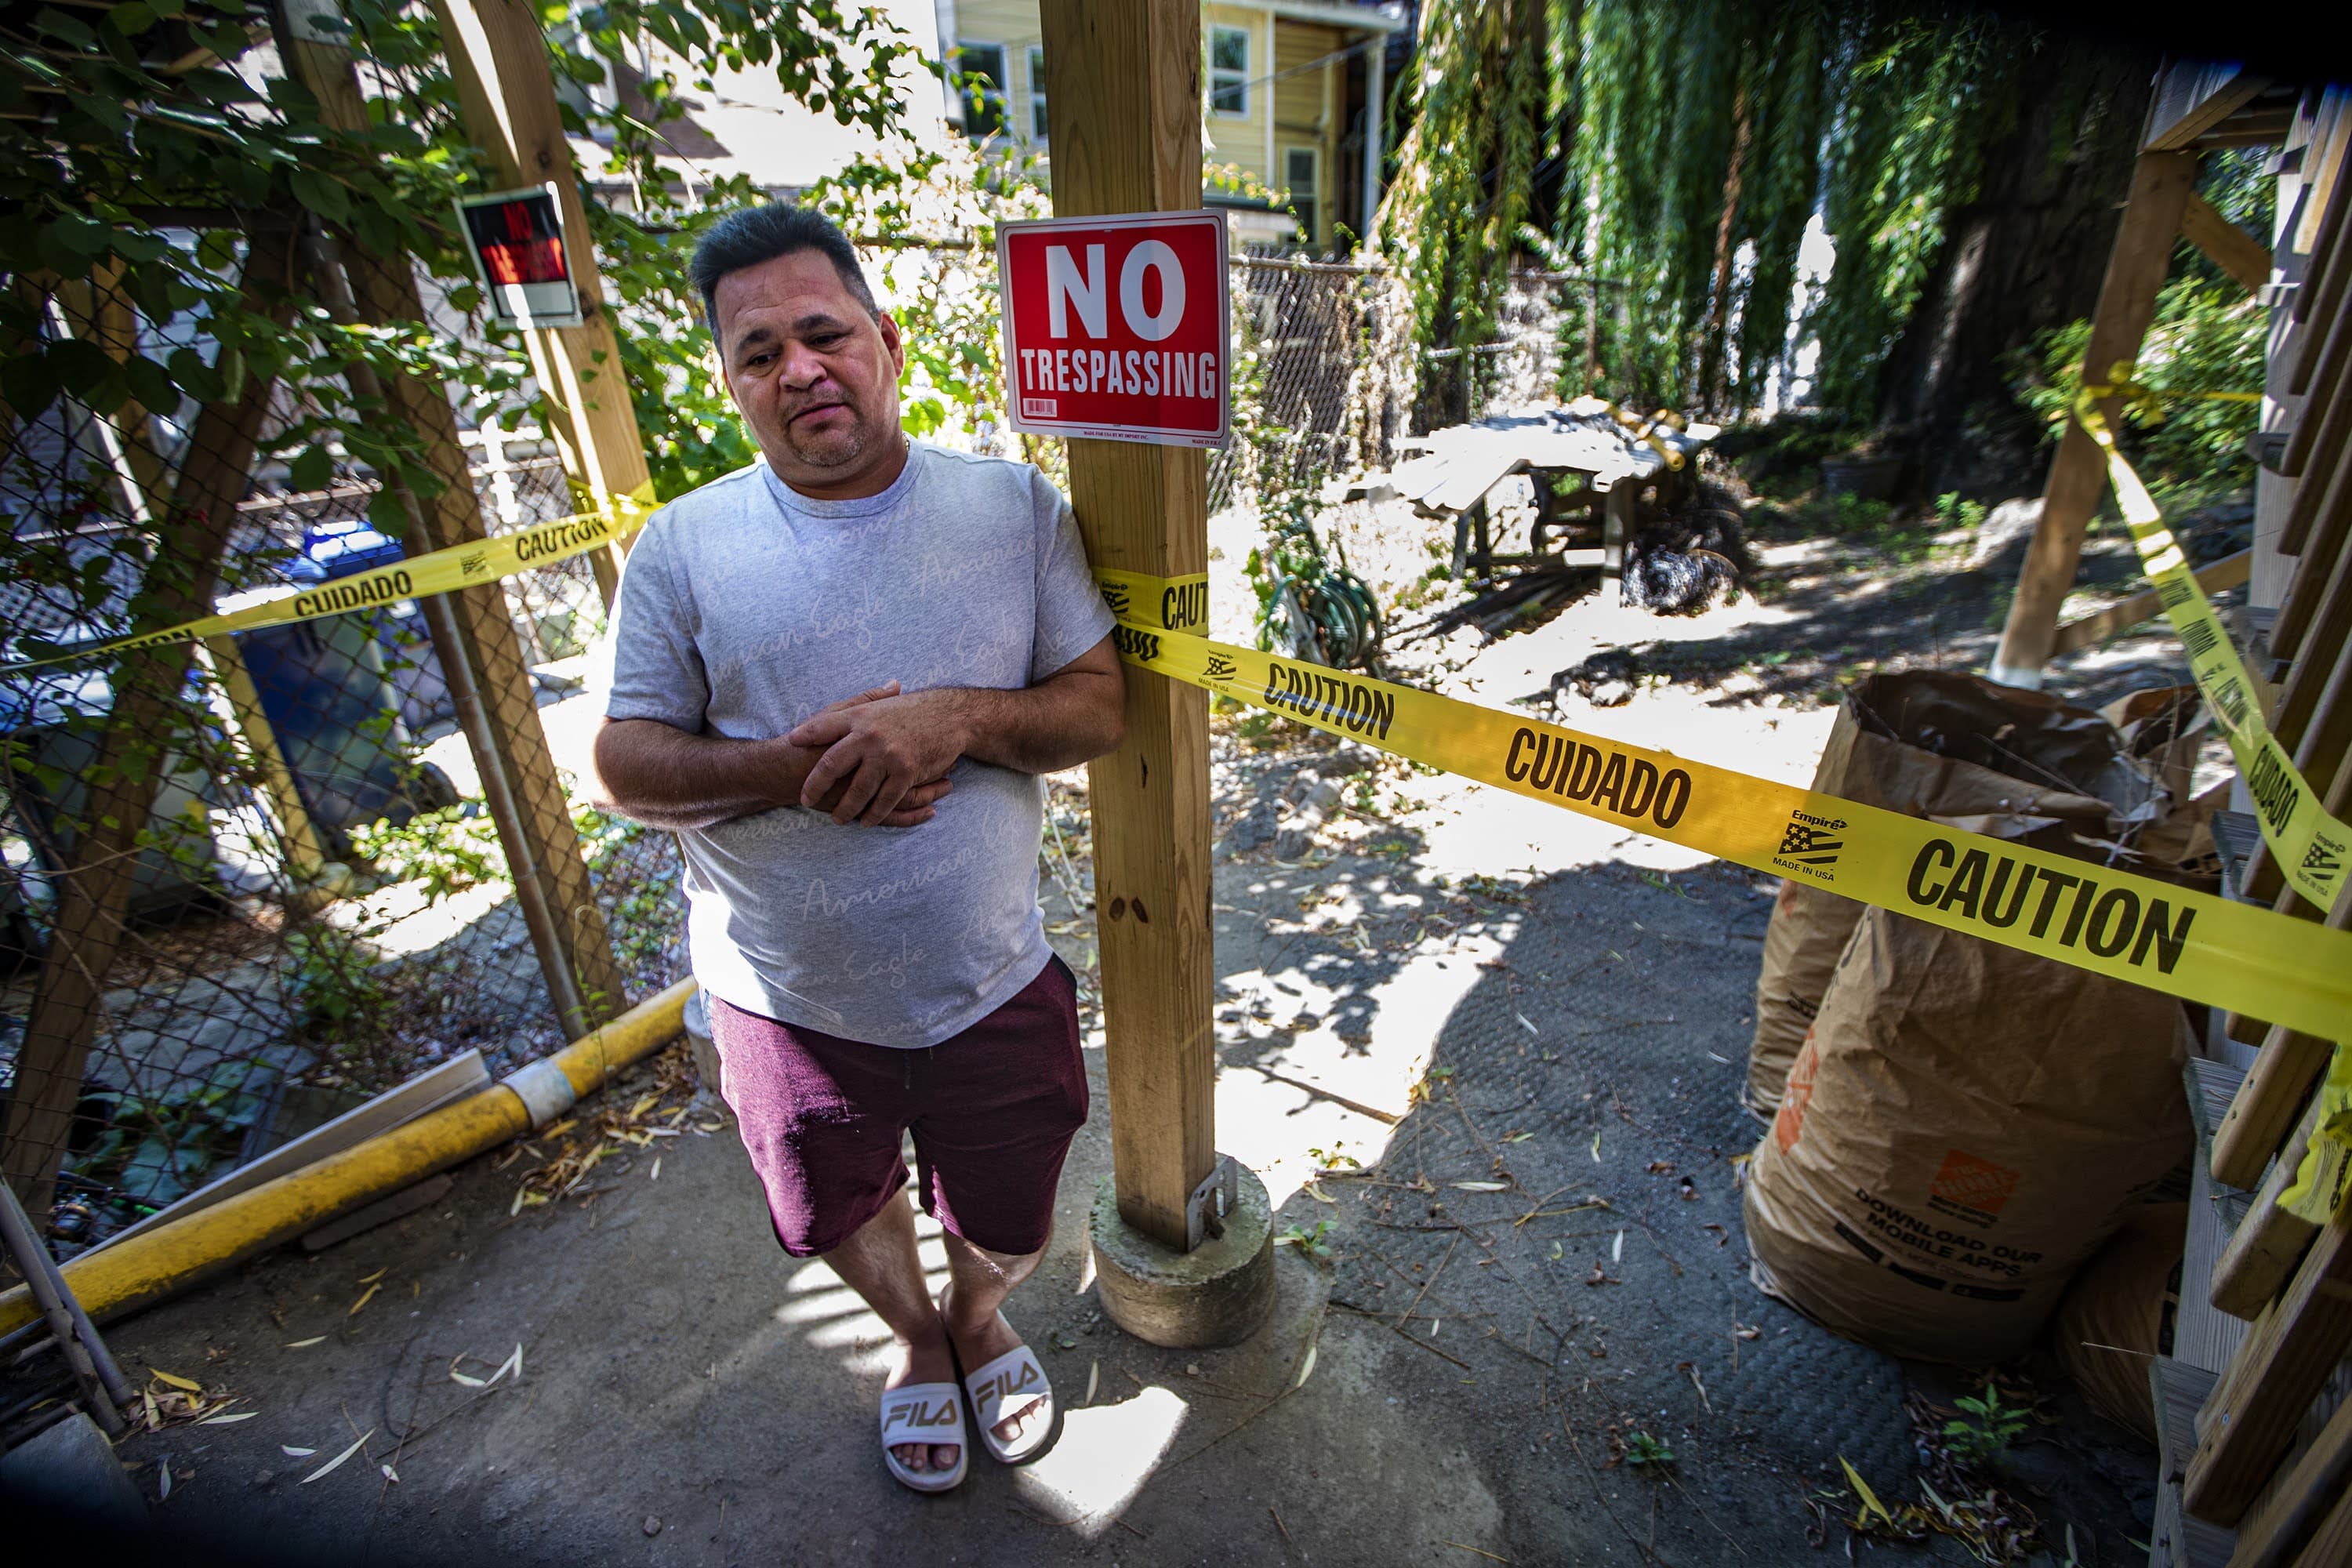 Amid caution tape and no trespassing signs, Marvin Moreno stands outside the apartment where he lived in East Boston. His landlord pressured him to leave, despite the eviction moratorium. (Jesse Costa/WBUR)